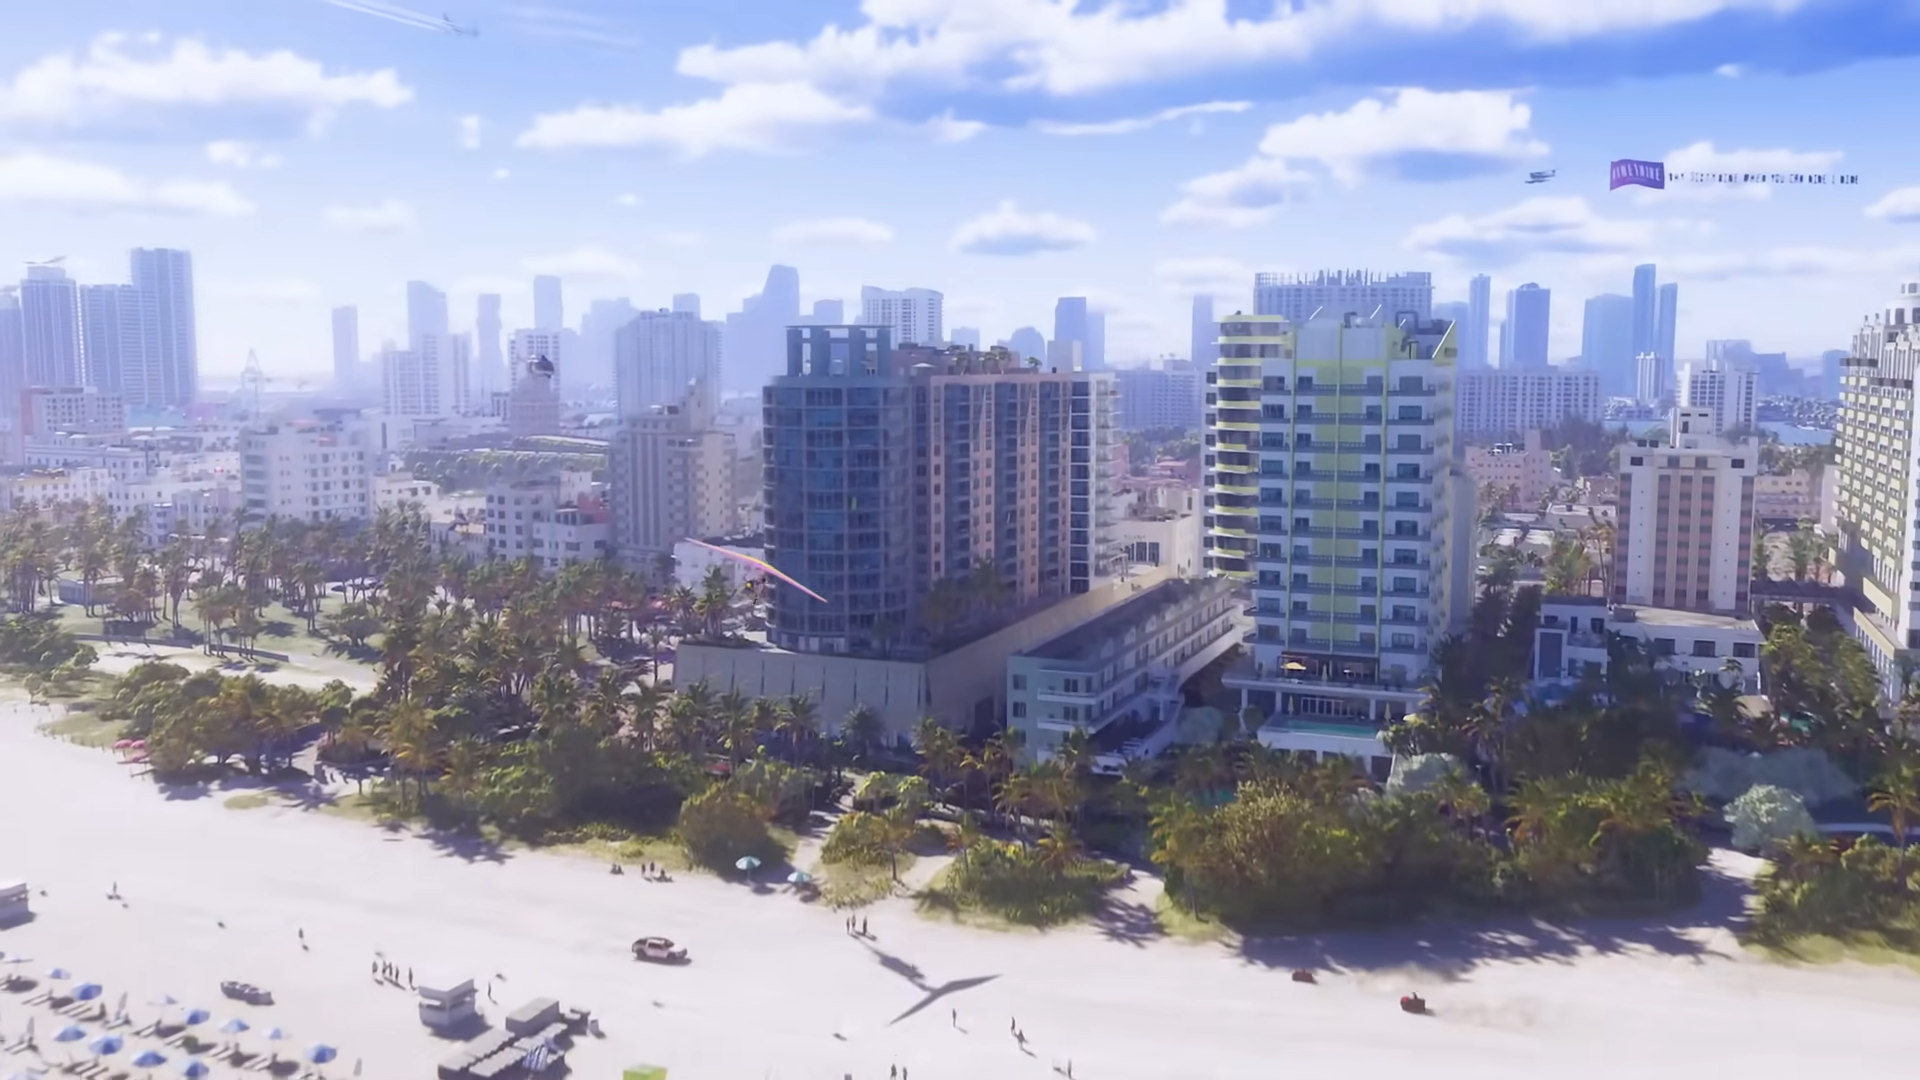 GTA 6 With Franklin, Trevor And Michael: New Fan Trailer Reimagines Iconic Characters